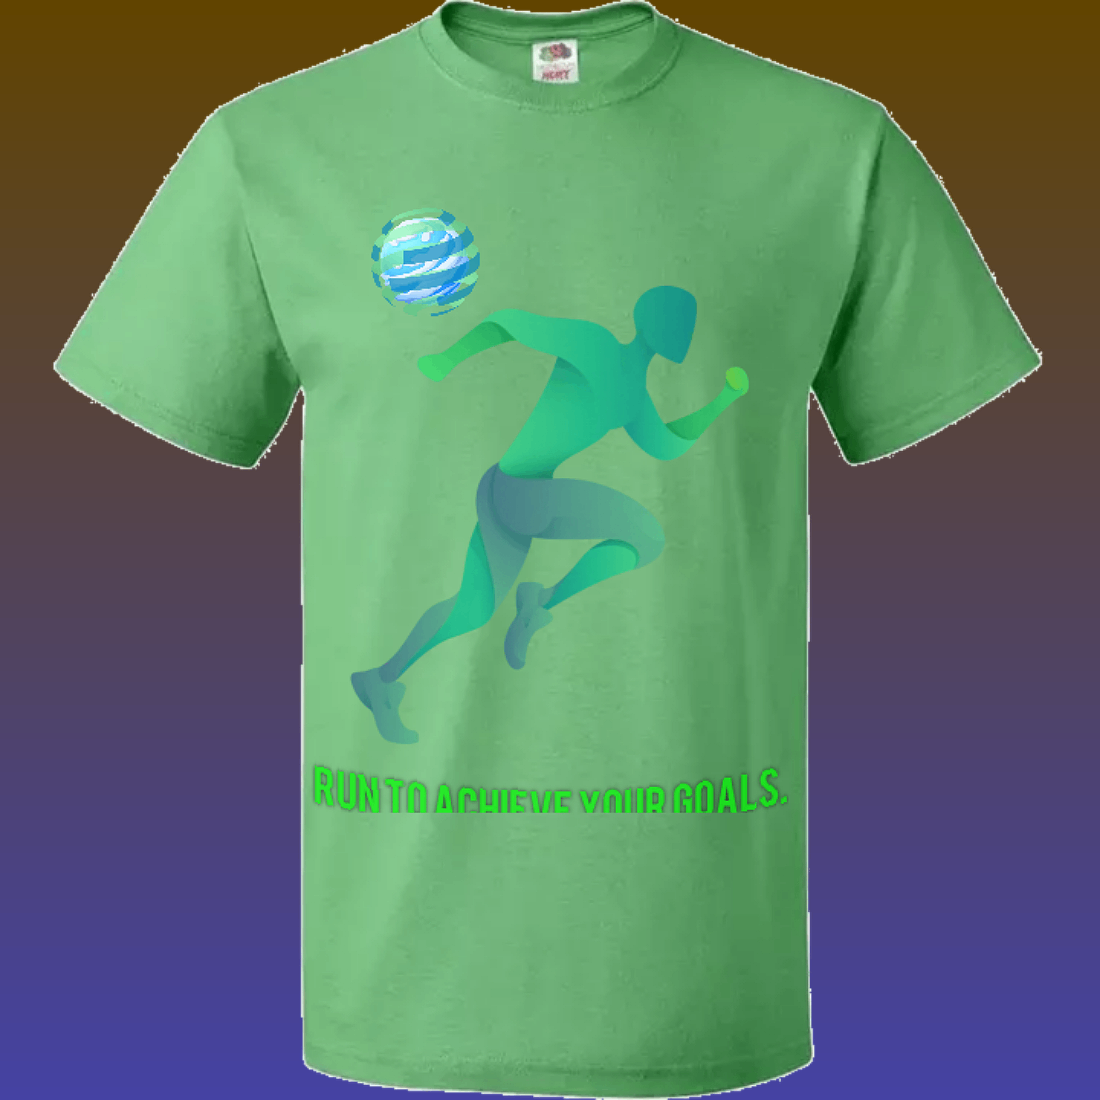 T-shirts design(green colour) cover image.